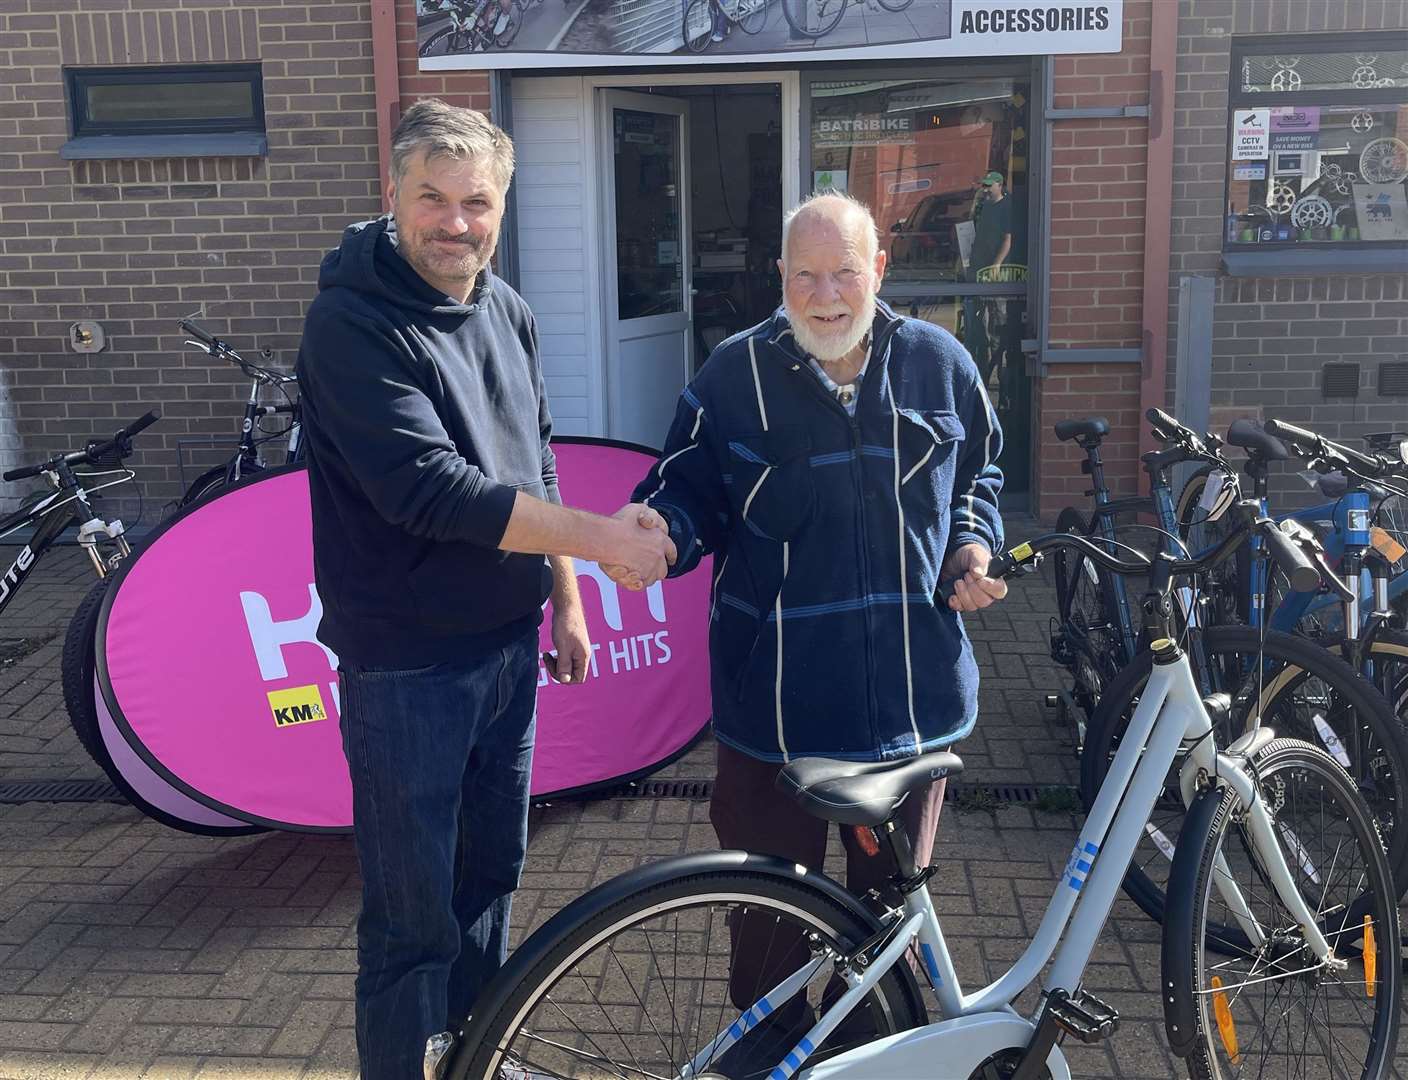 Gavin at Homewood Cyles was happy to help Mr Fagg get a new bike